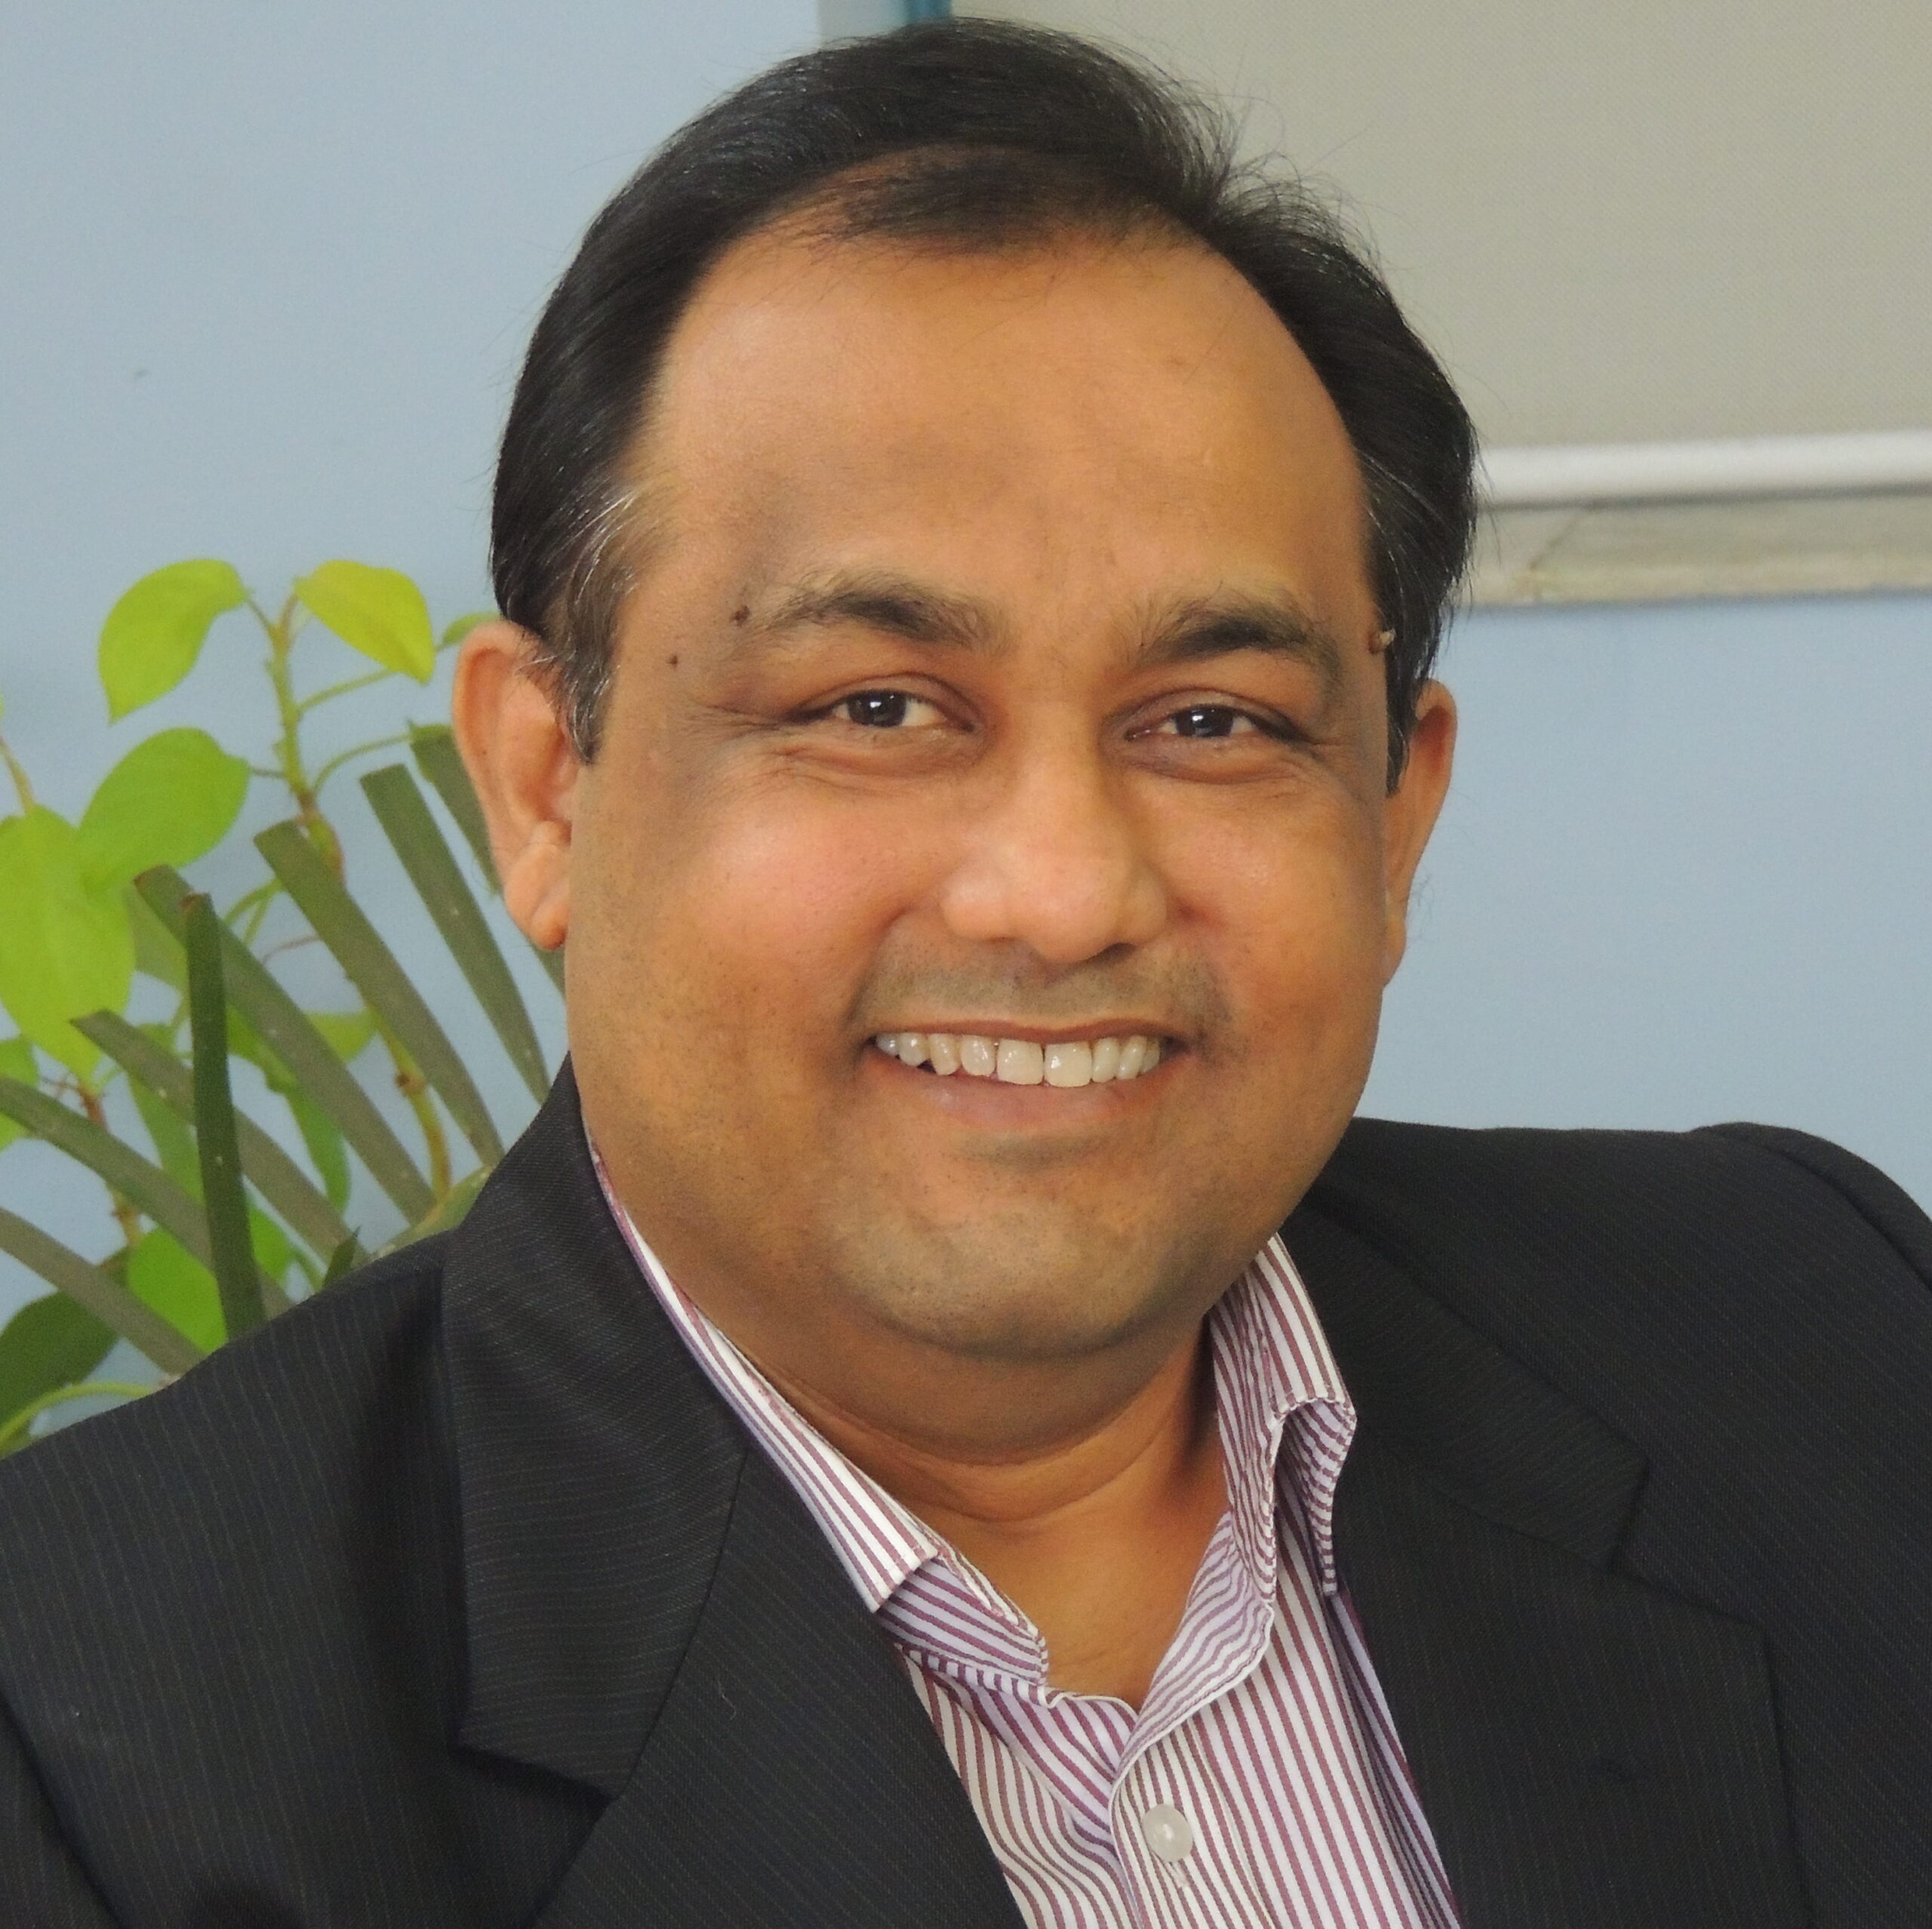 Profile photo of Saikat Basu, CEO at Consultivo - ESG, Sustainability and Risk Management Firm